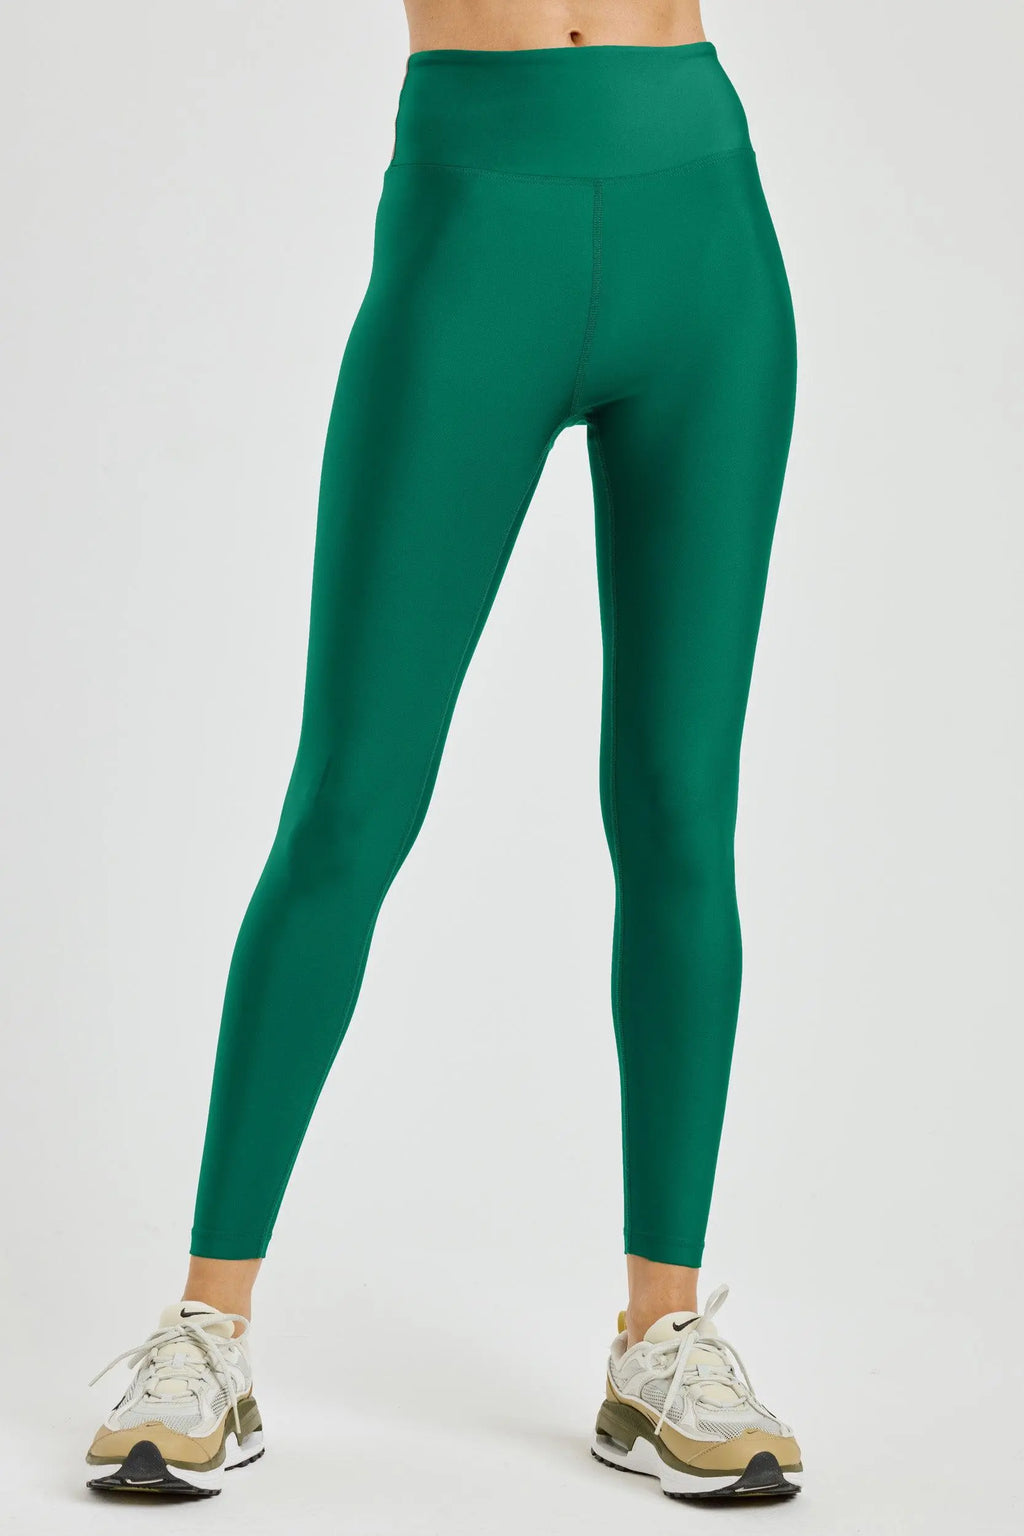 Most Popular Color Leggings For Women 2020  International Society of  Precision Agriculture